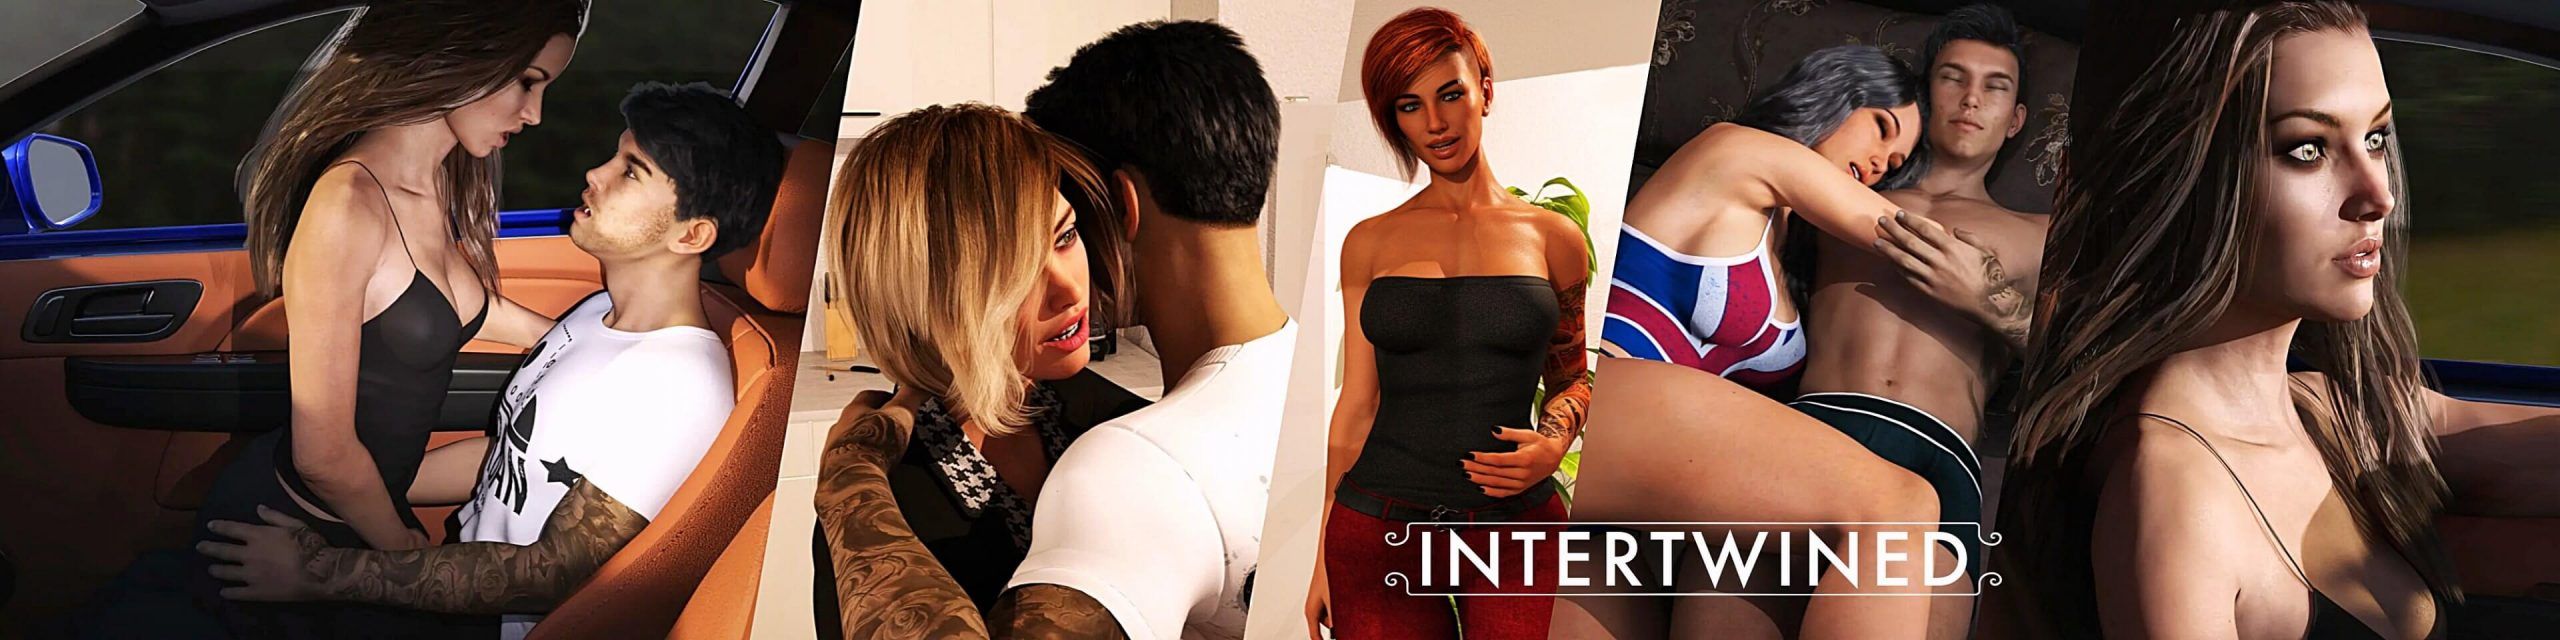 Intertwined [v0.10]